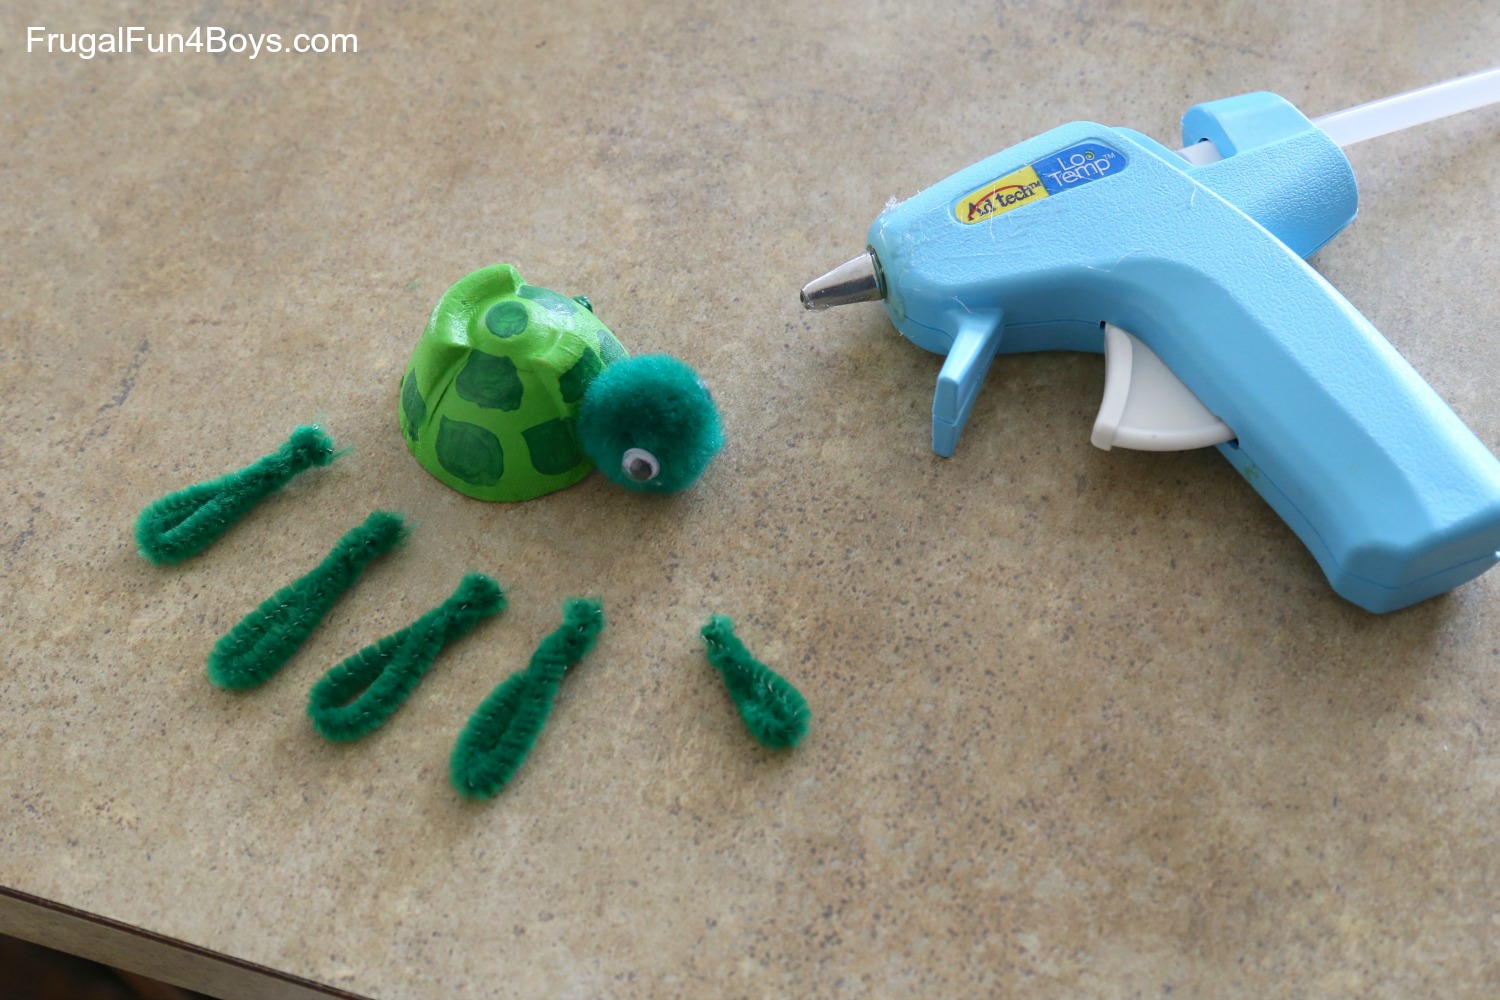 Adorable Egg Carton Turtle Craft (And a Caterpillar and Frog too!) - Frugal  Fun For Boys and Girls